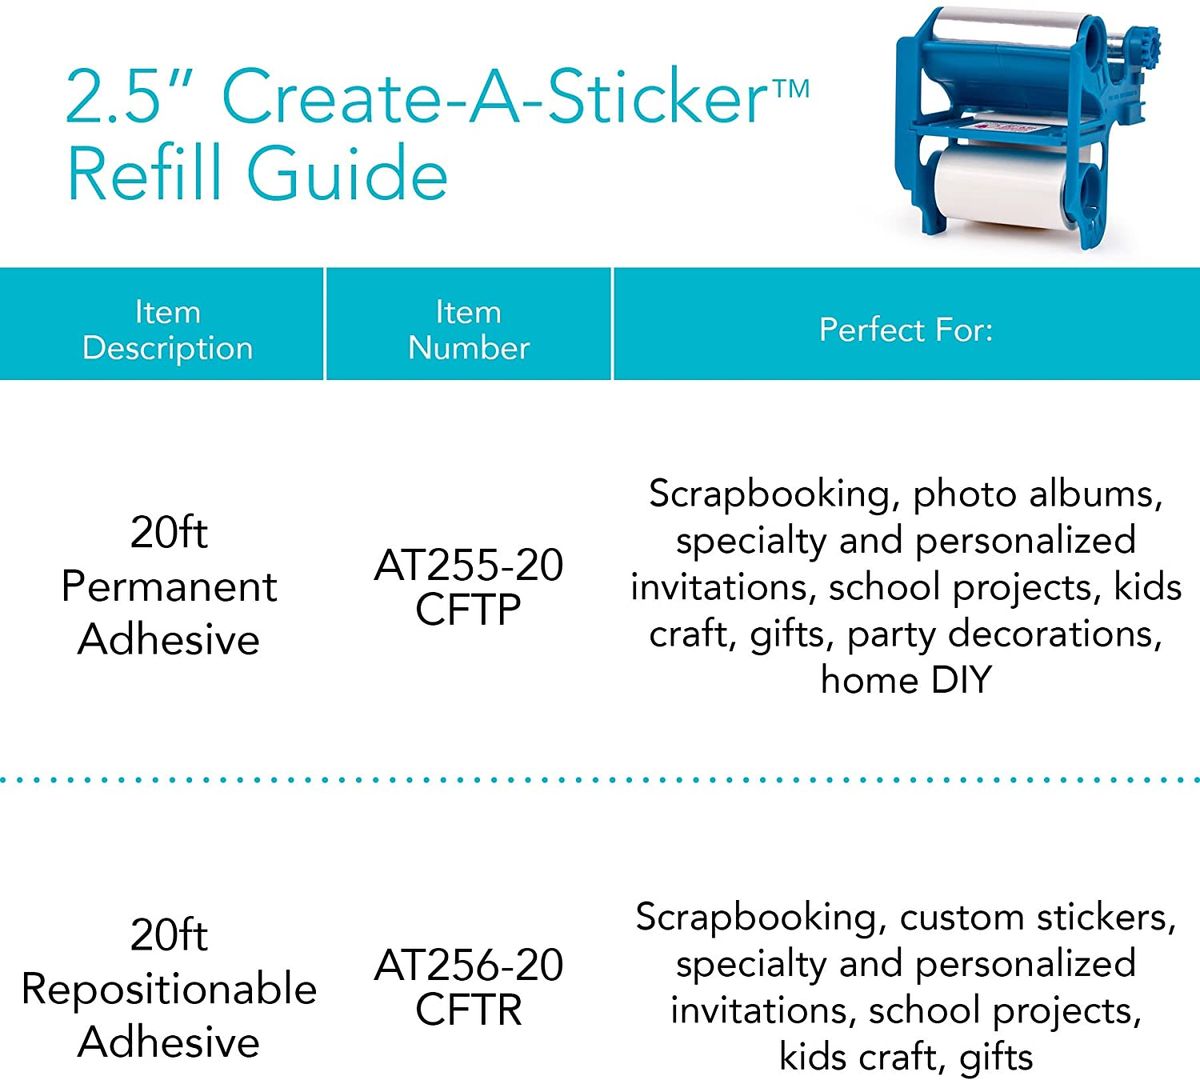  Xyron 2 1/2 in. Create-A-Sticker Permanent Refill 20 ft.:  Laminating Supplies: Wall Art